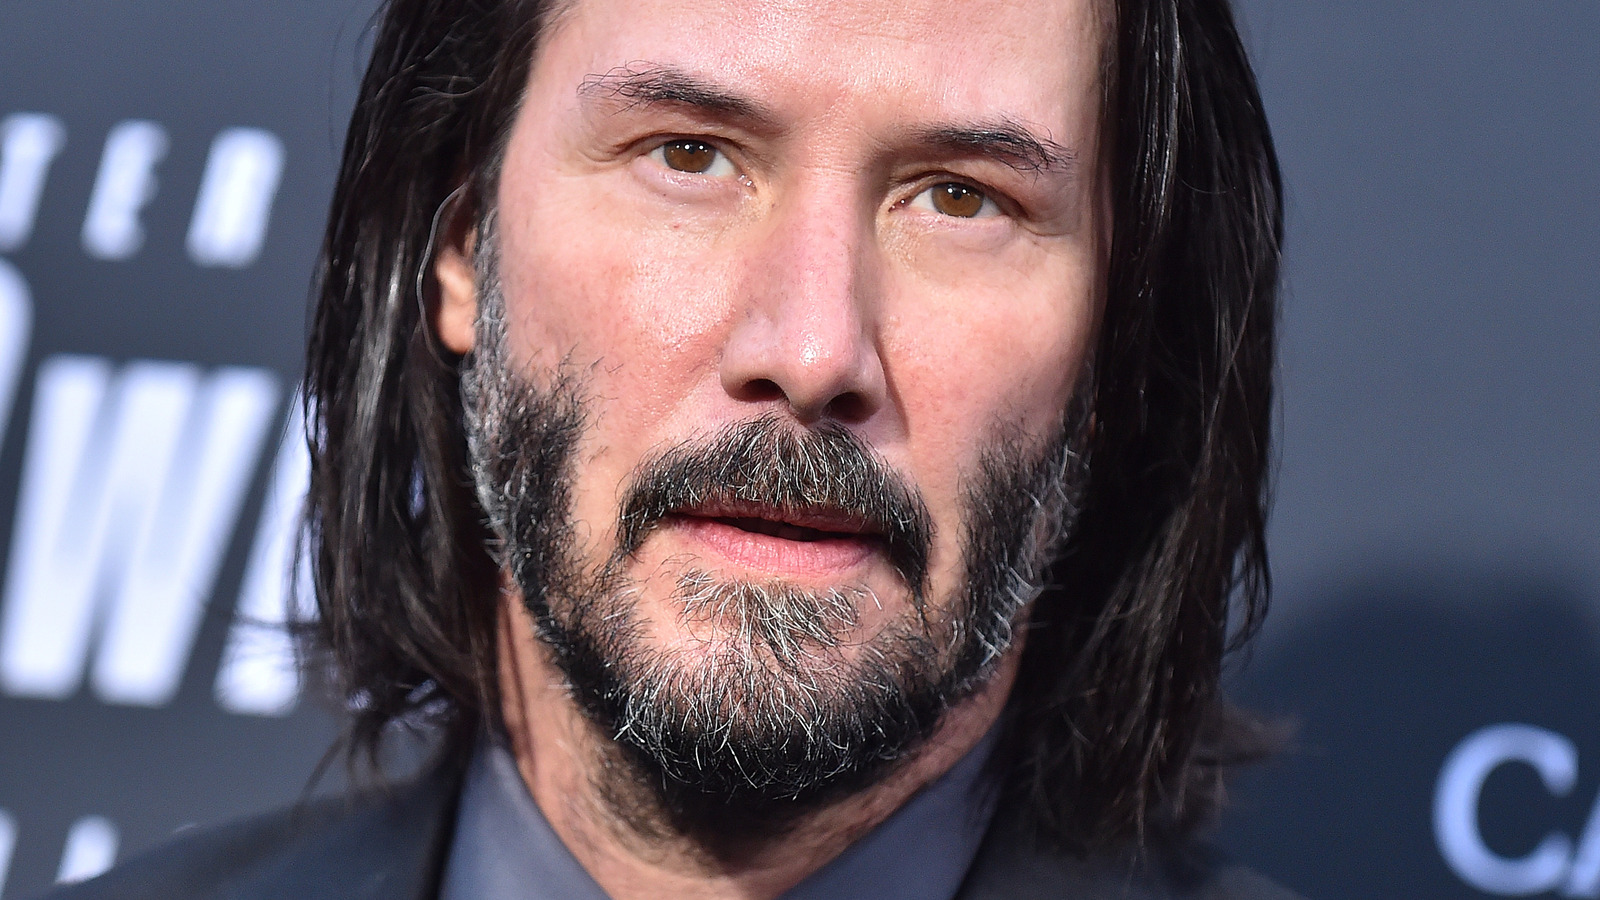 Keanu Reeves’ Rare Appearance With His Girlfriend Is Getting Attention